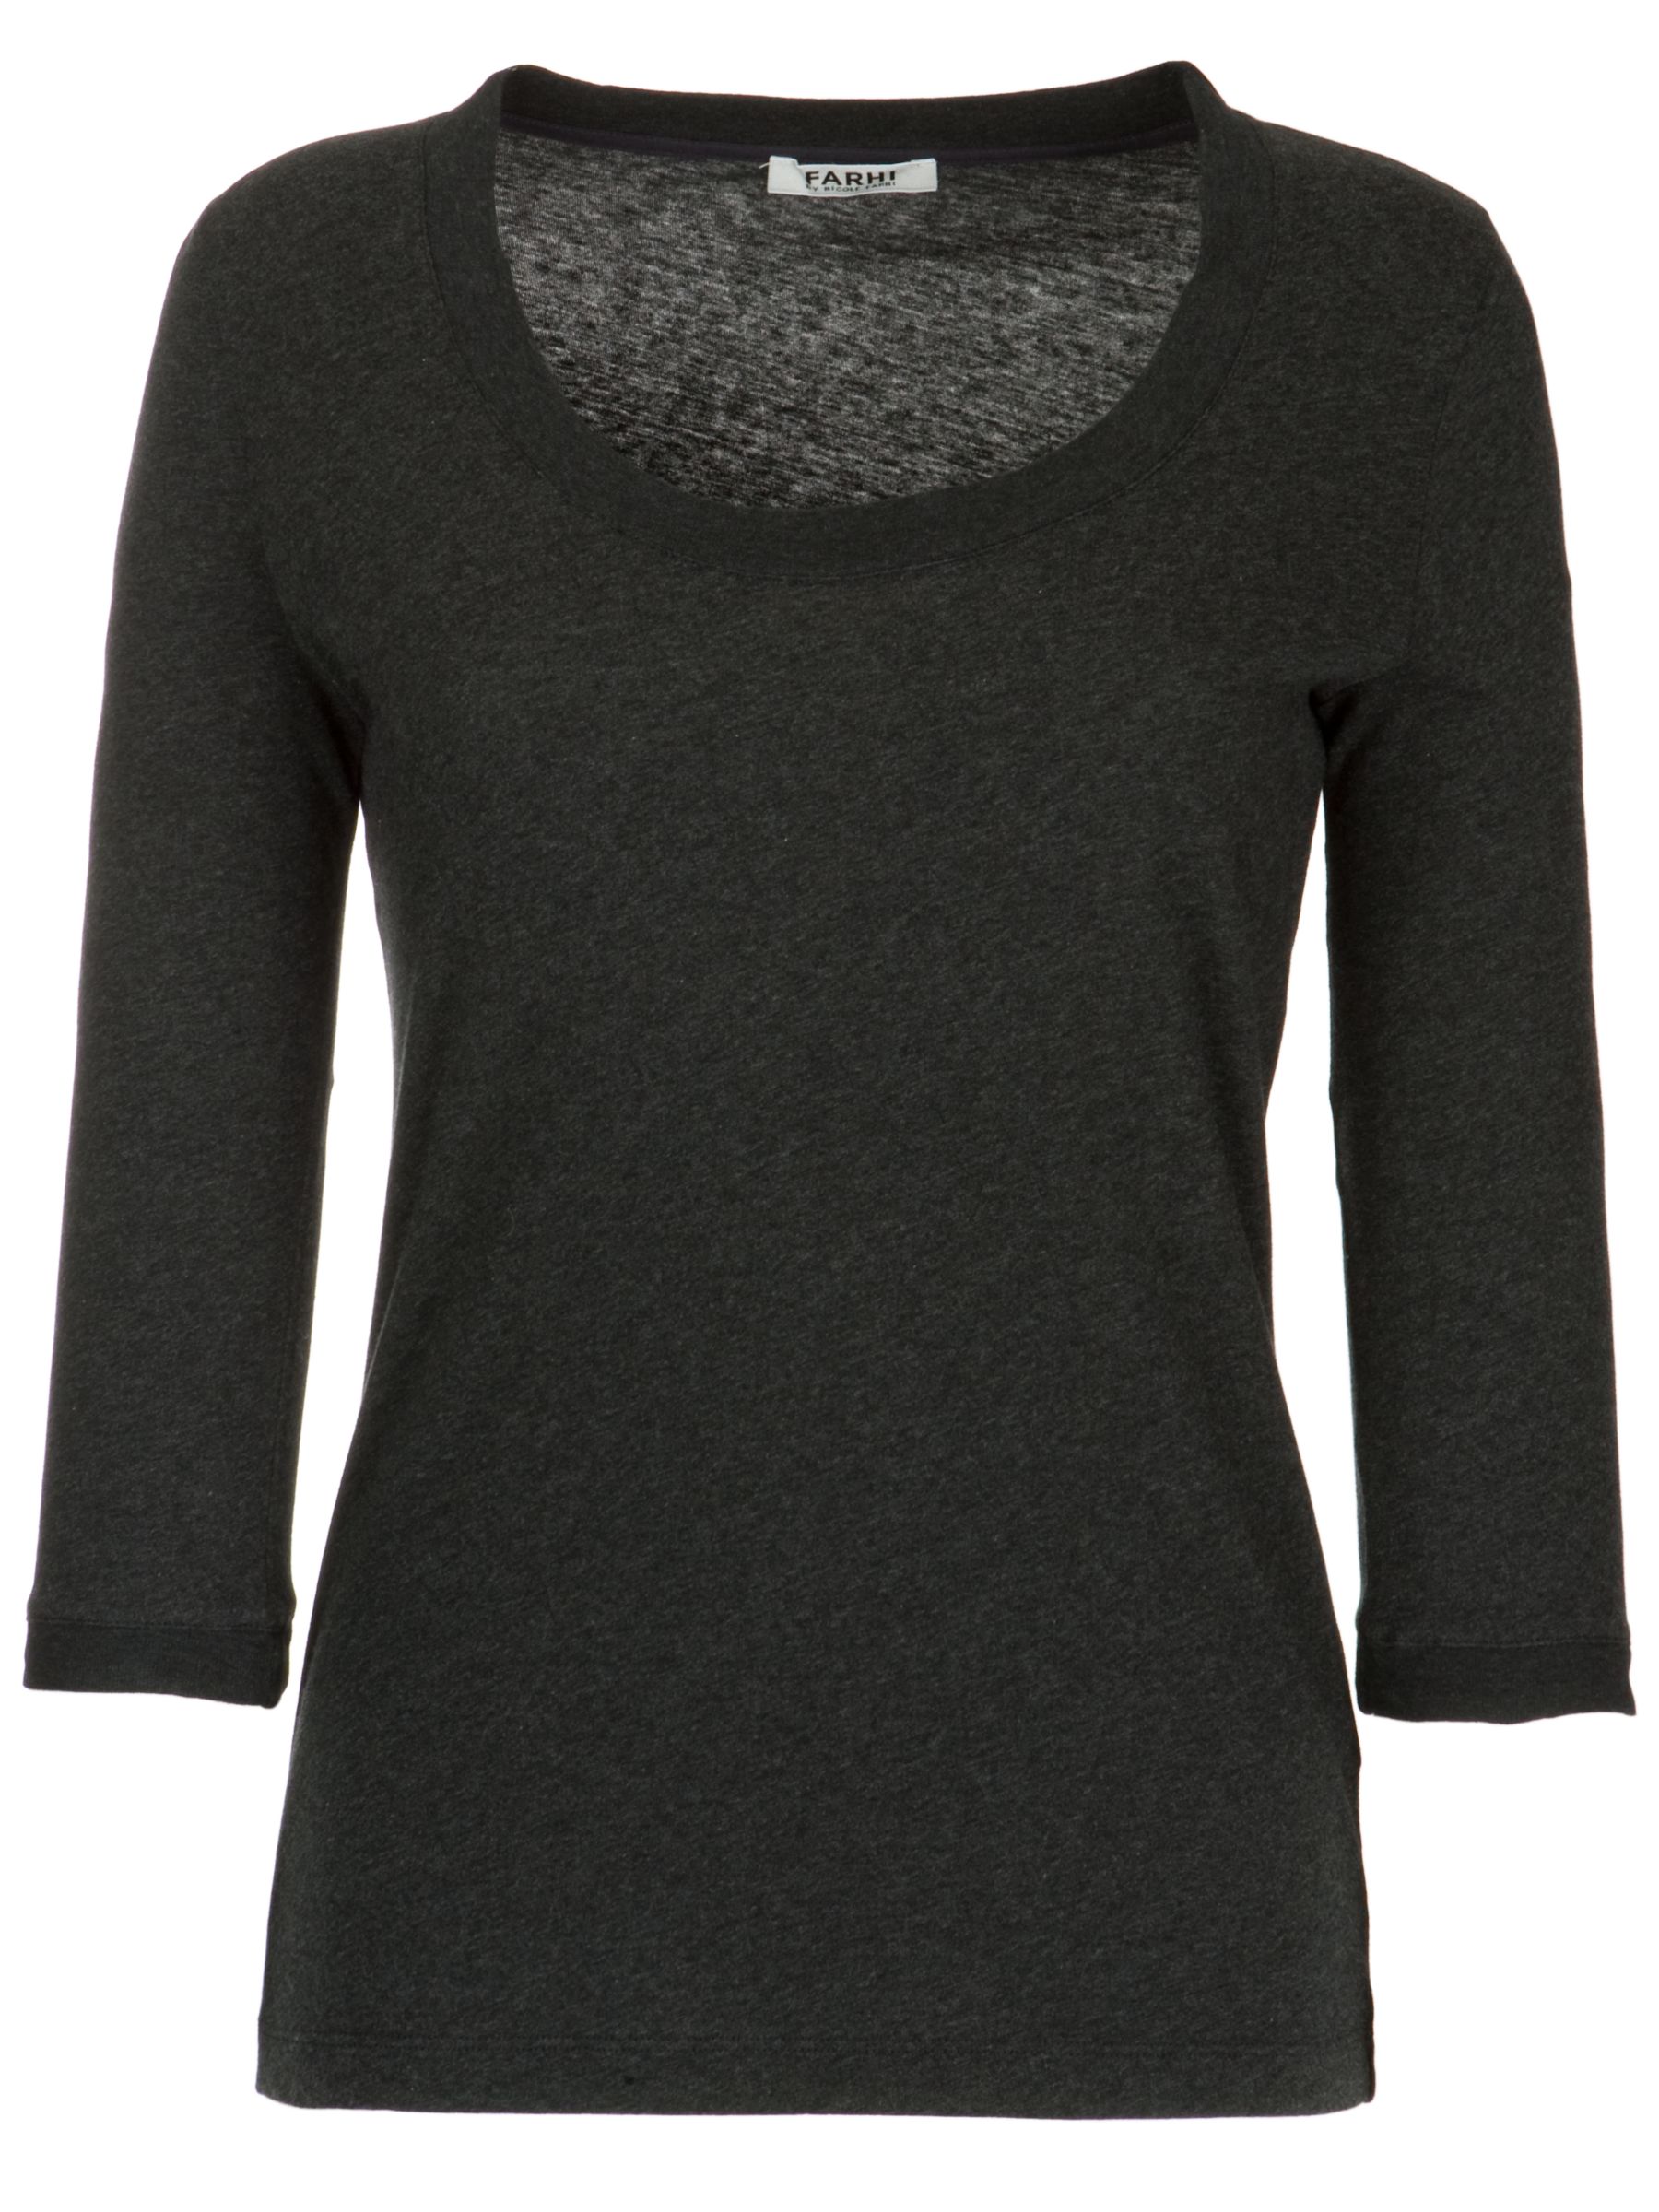 Round Neck T-Shirt, Charcoal